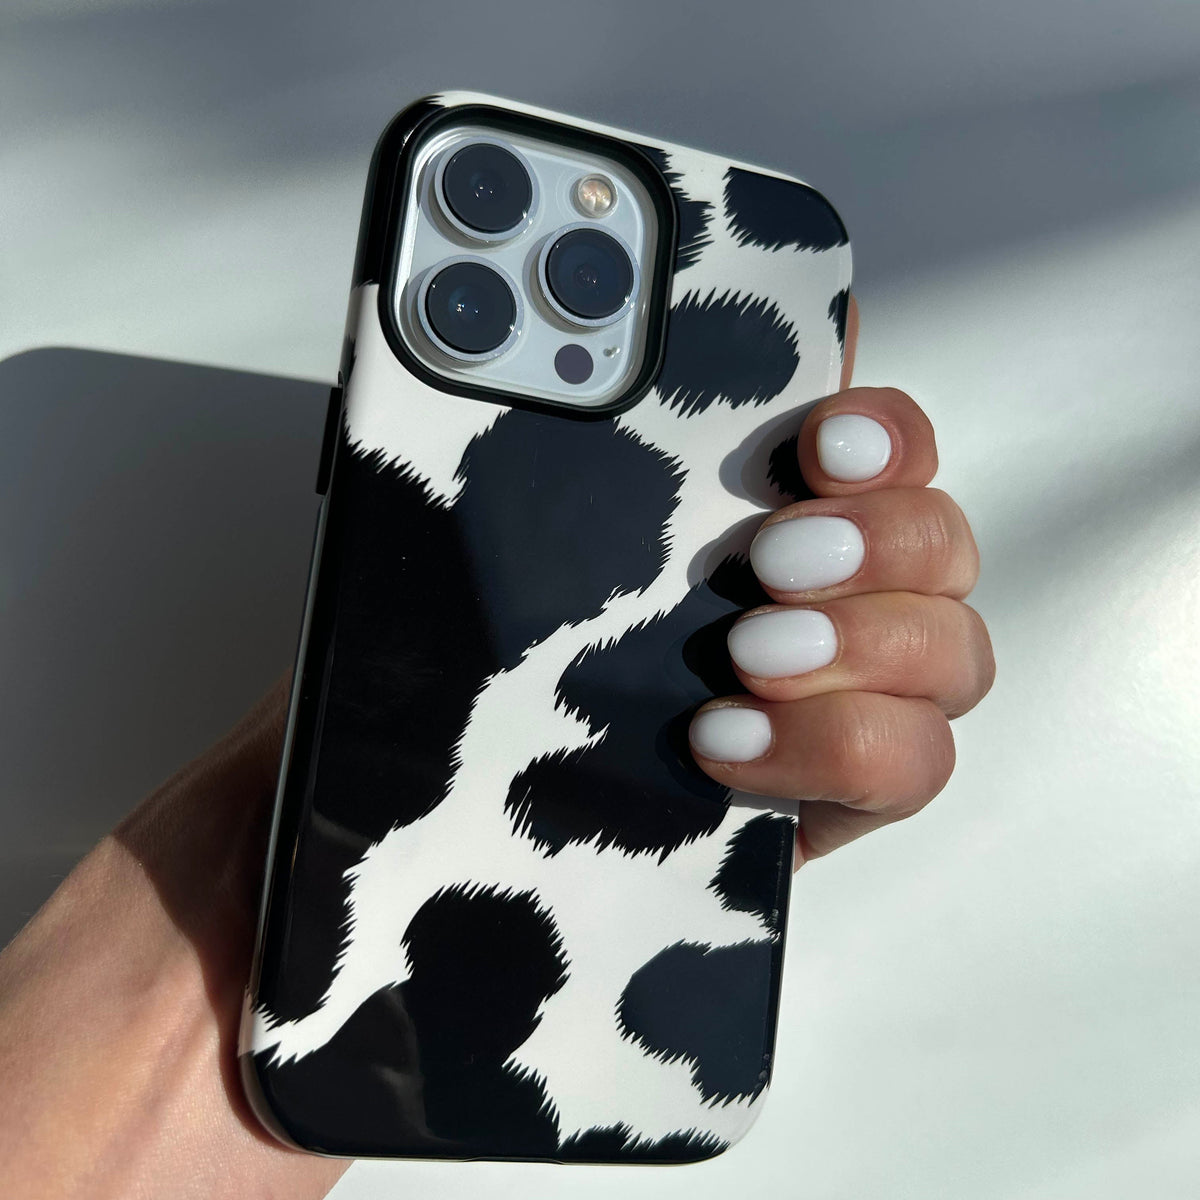 Cow Skin iPhone Case - iPhone 12 Pro